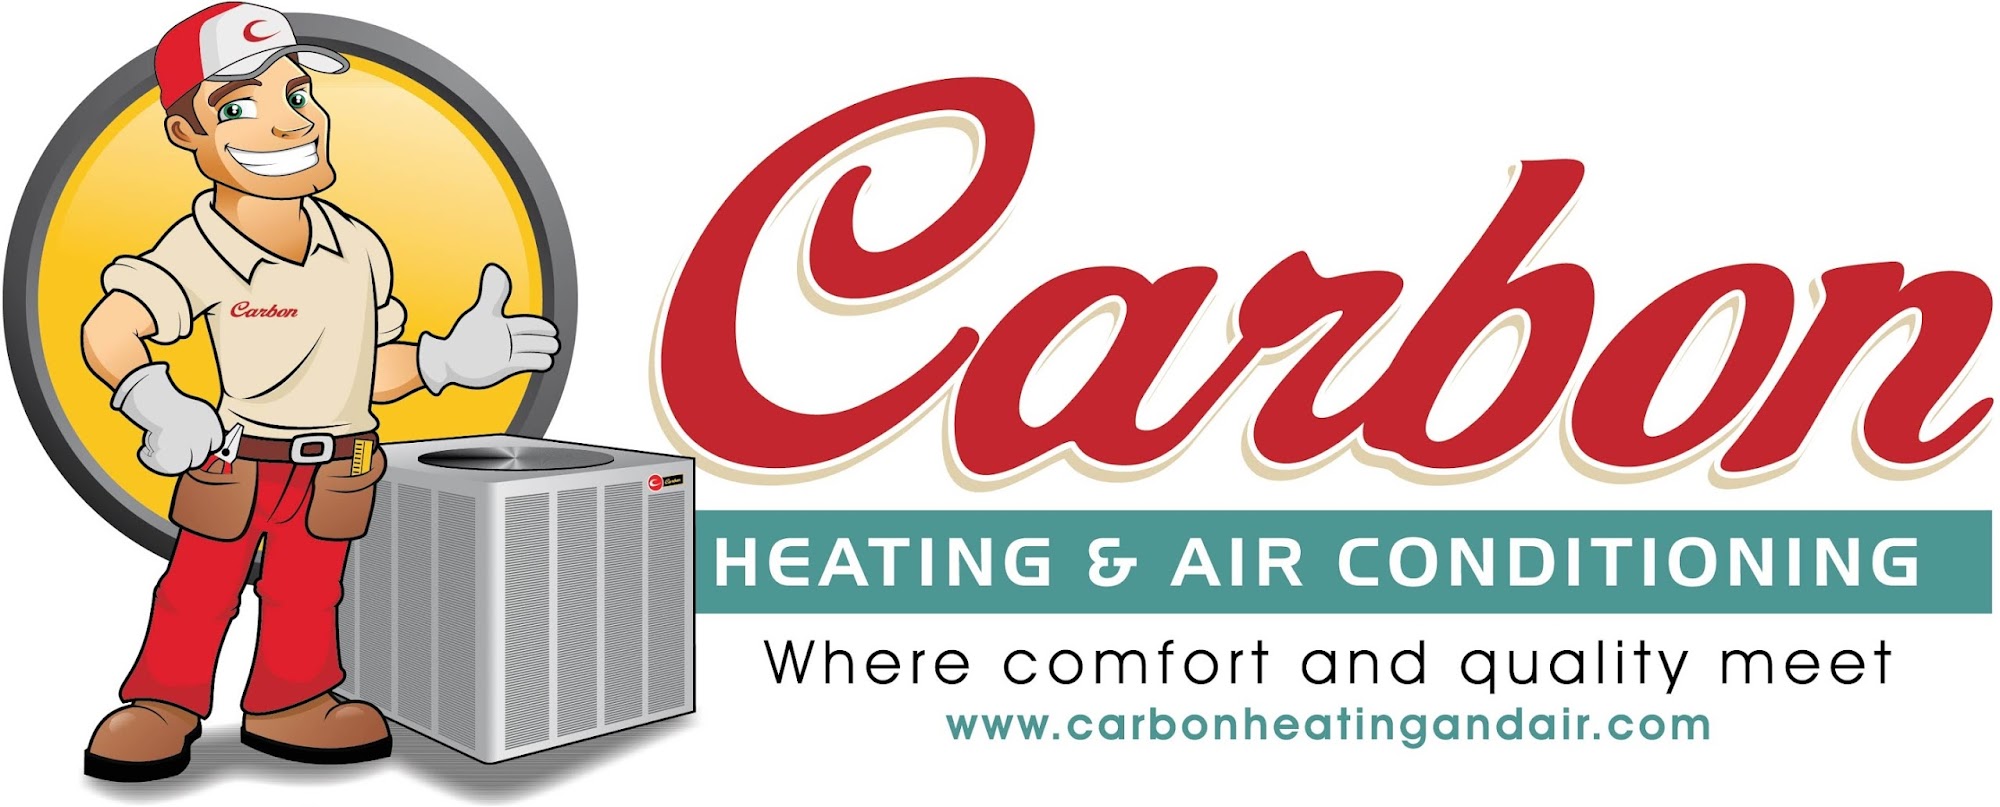 Carbon Heating & Air Conditioning 9727 Crawford St, Knightsville Indiana 47857